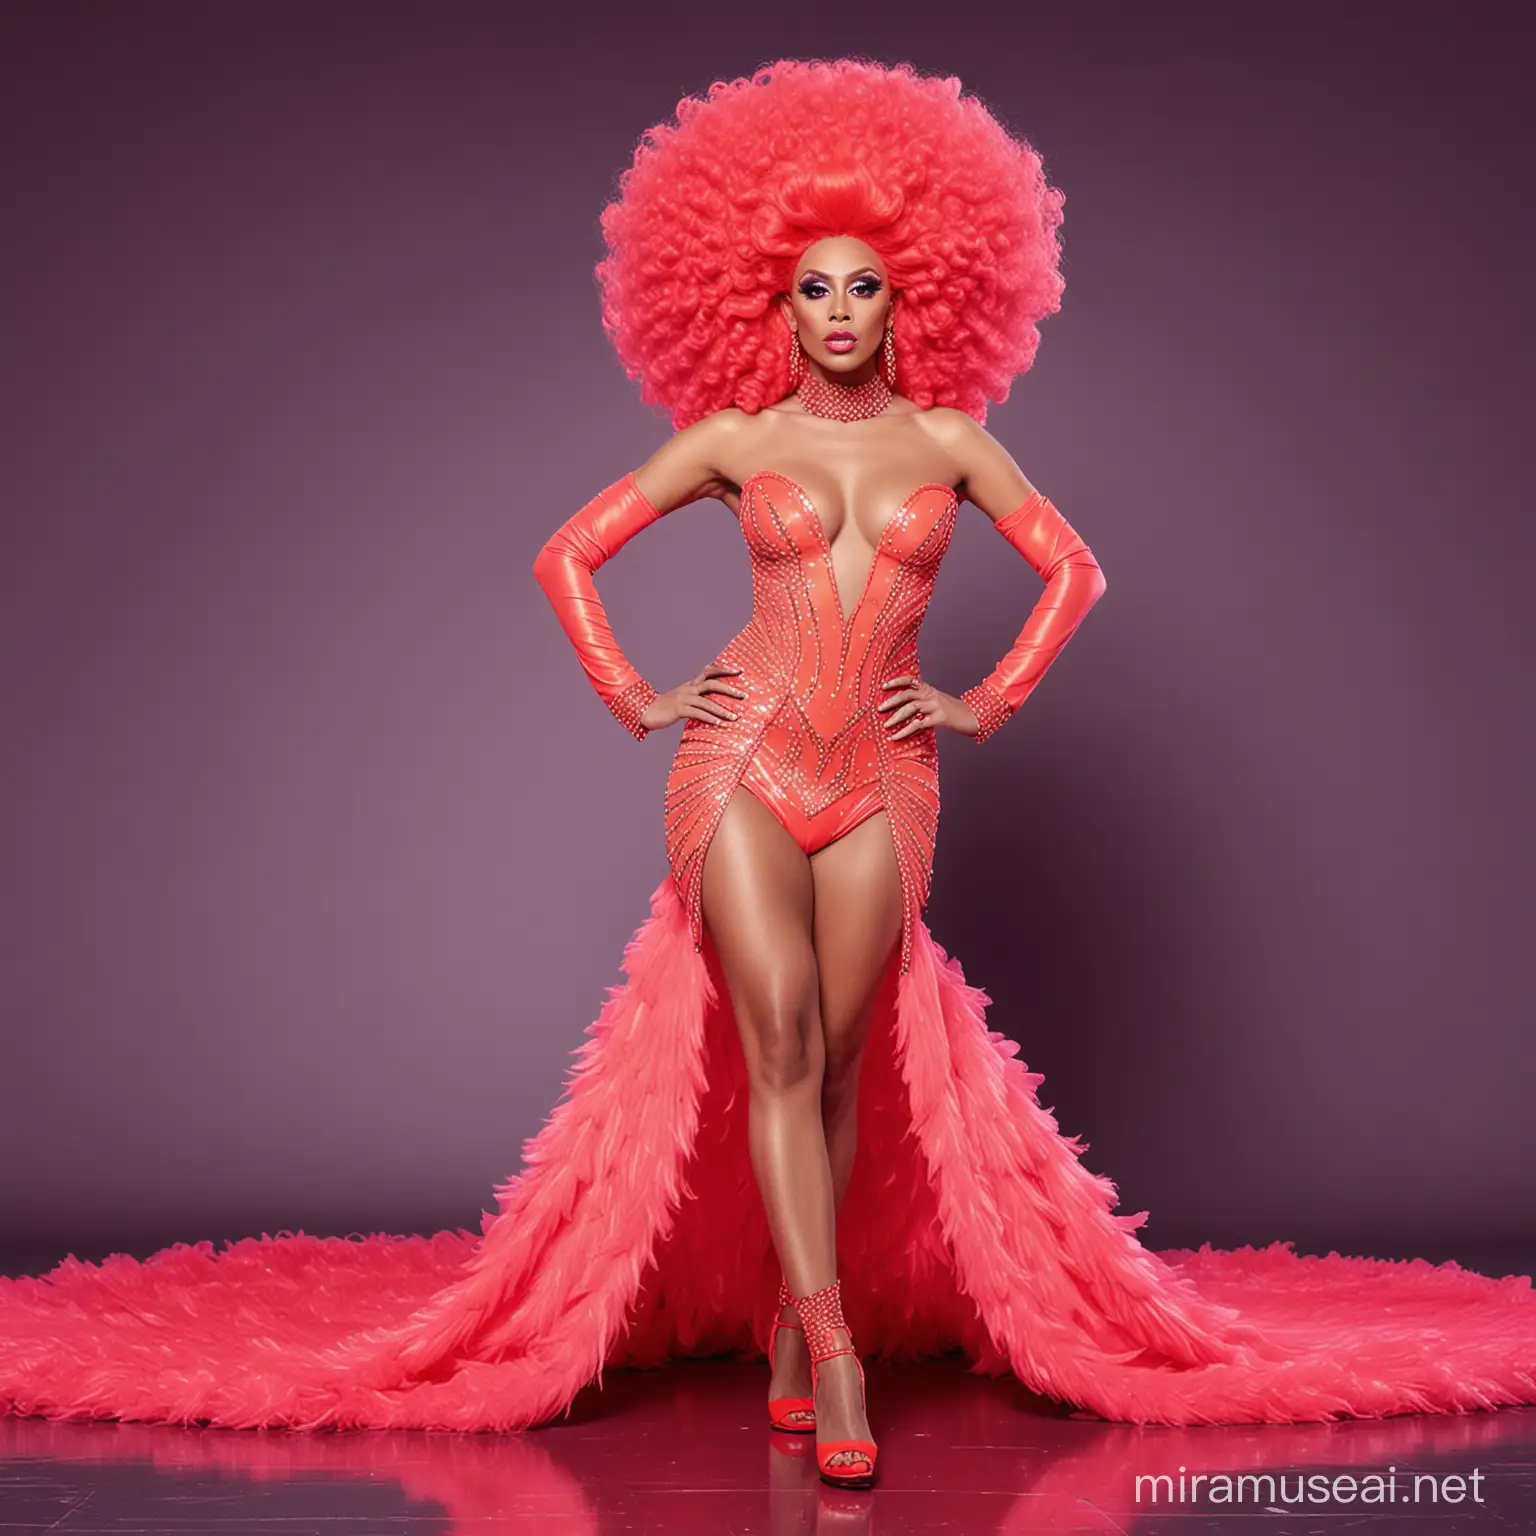 a full body image of a skinny brazilian neon drag queen walking on the Rupaul's Drag race runway wearing an outfit inspired by the prompt: red carpet couture 